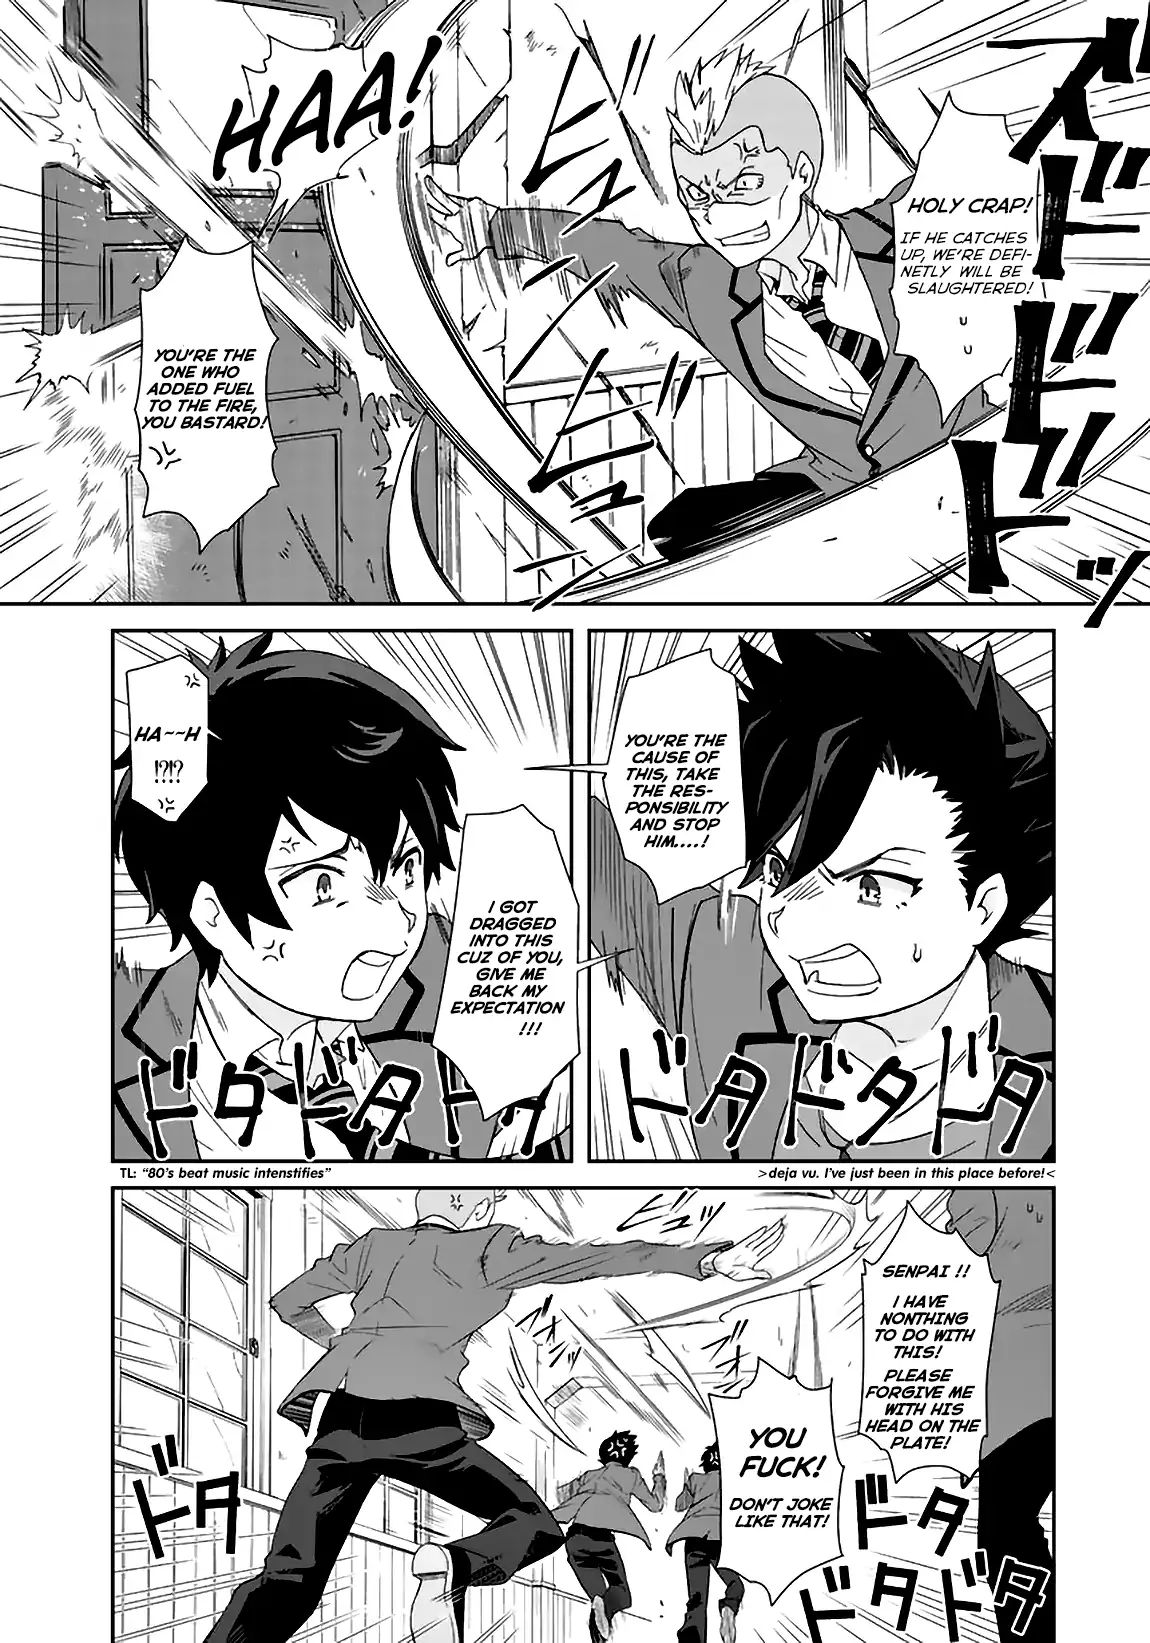 I, Who Possessed A Trash Skill 【Thermal Operator】, Became Unrivaled. Chapter 2 #10